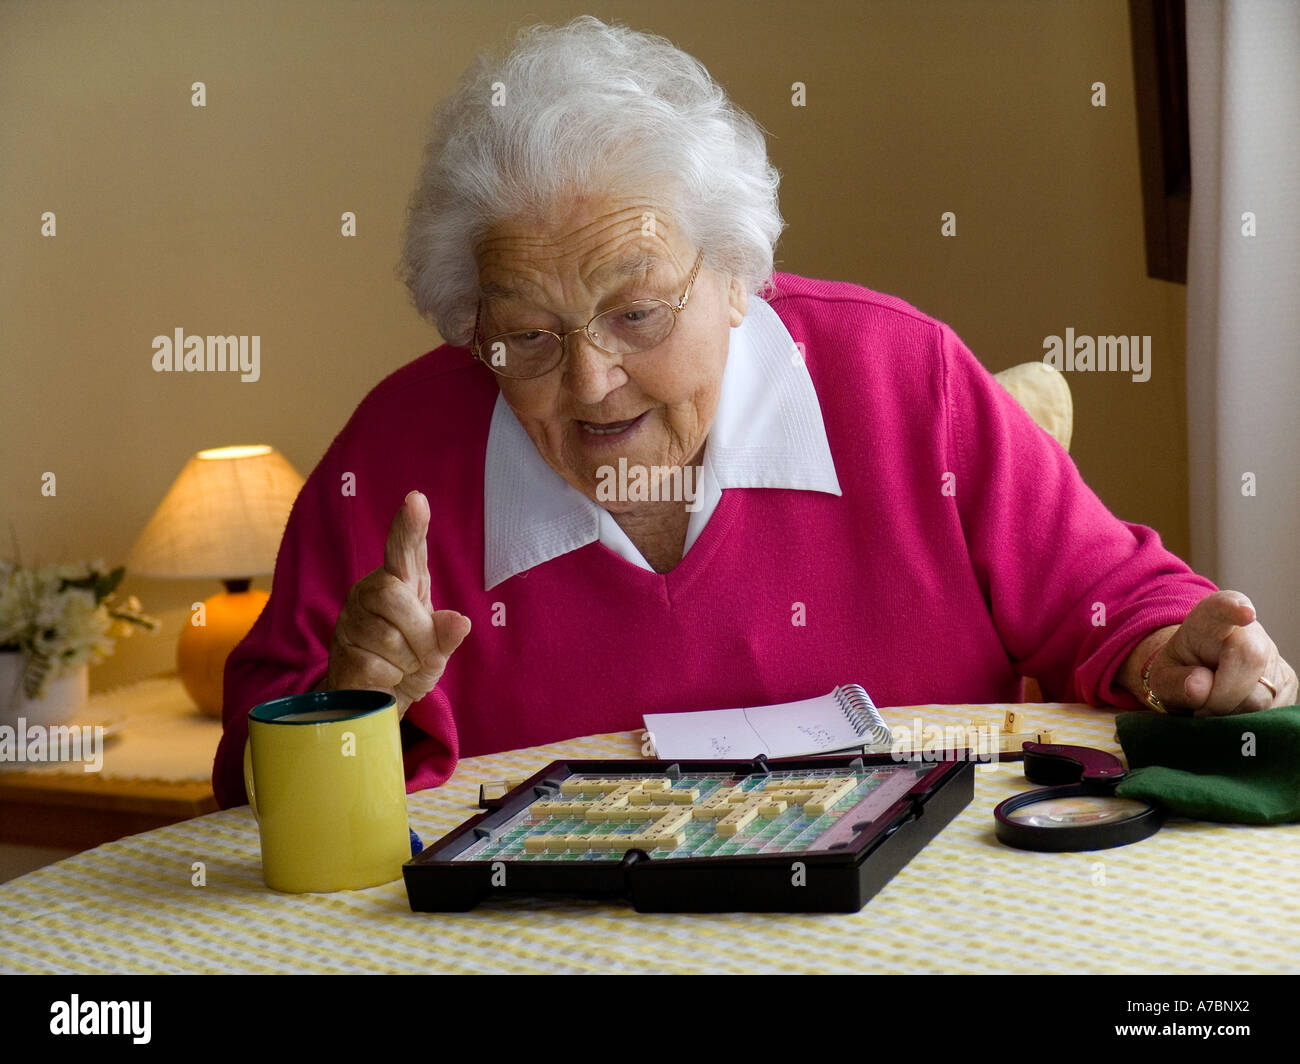 Elderly lady  keeping her mind alert by playing single scrabble word game at living room table in natural window light Stock Photo